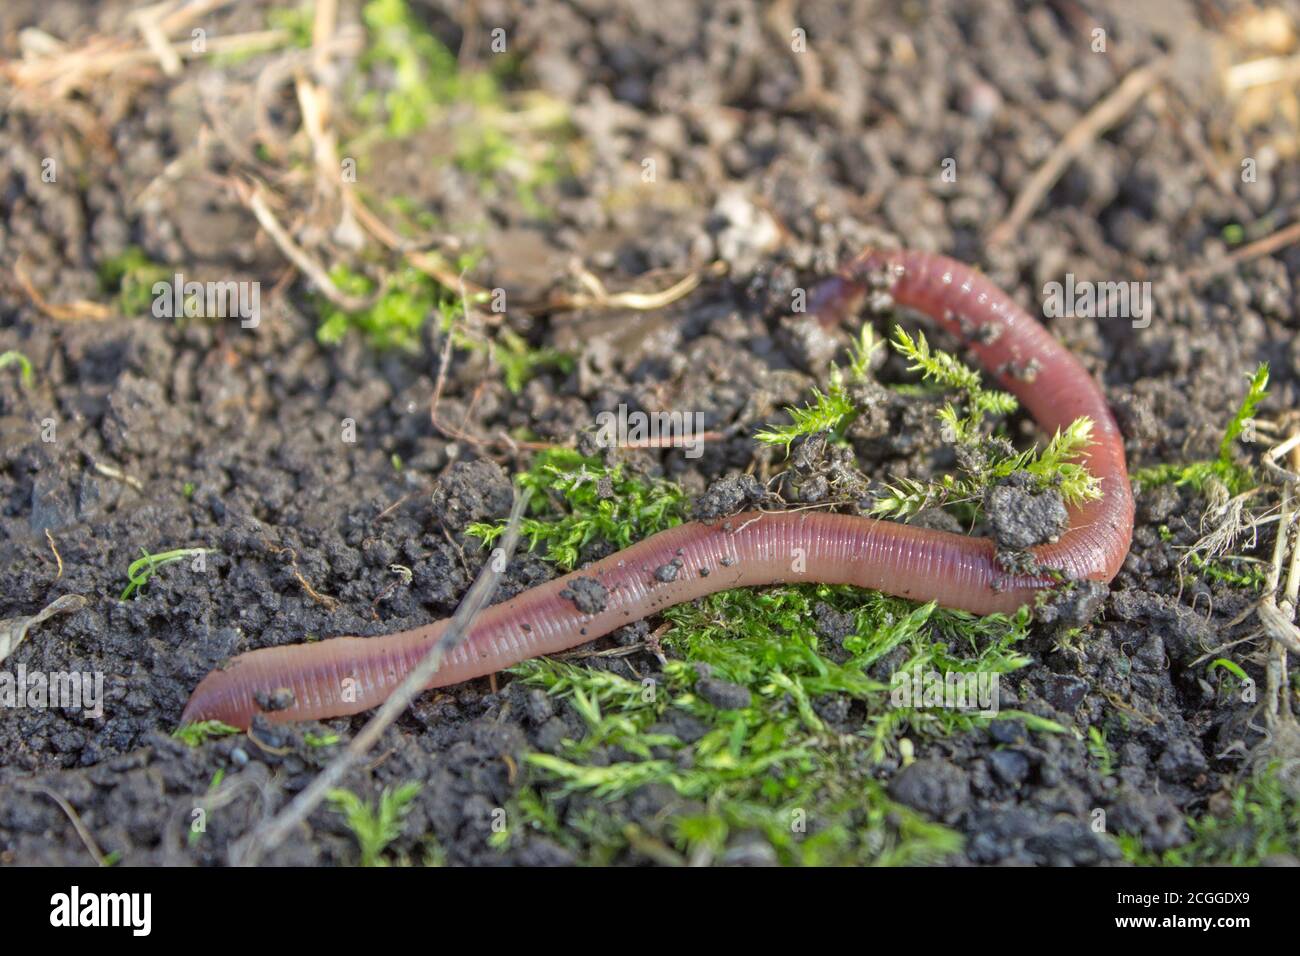 Earthworm creeps on the ground, close up Stock Photo